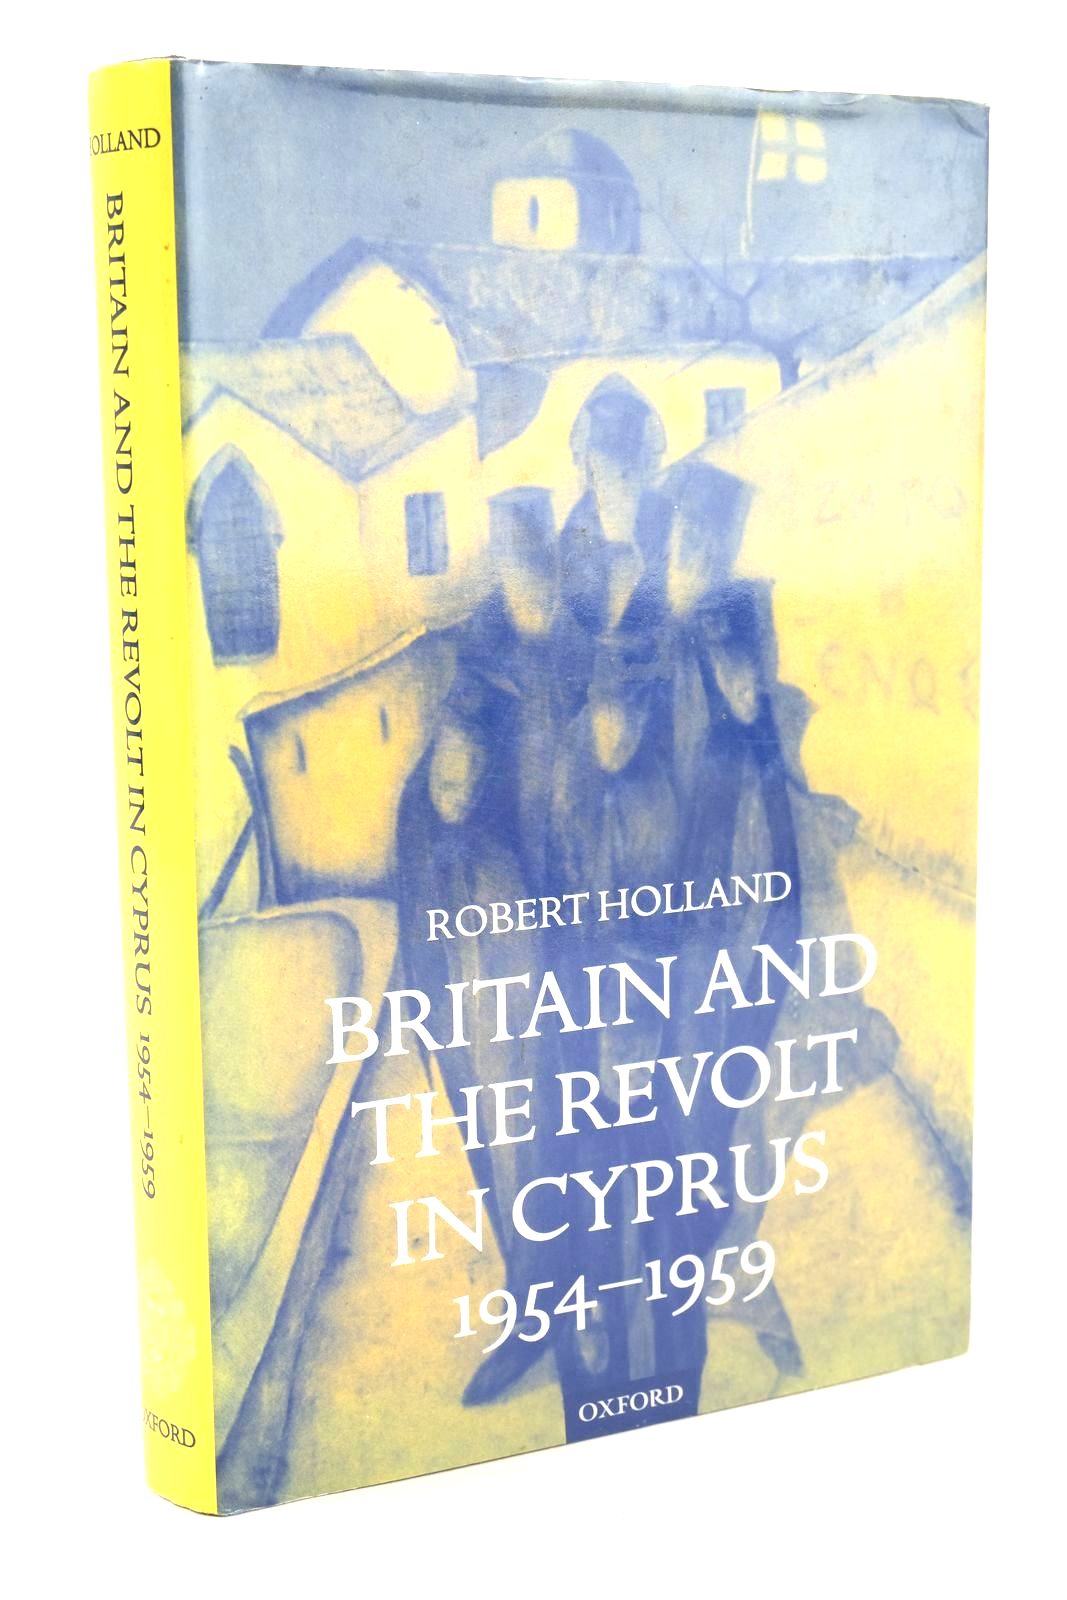 Photo of BRITAIN AND THE REVOLT IN CYPRUS 1954-1959 written by Holland, Robert published by Oxford University Press (STOCK CODE: 1327151)  for sale by Stella & Rose's Books